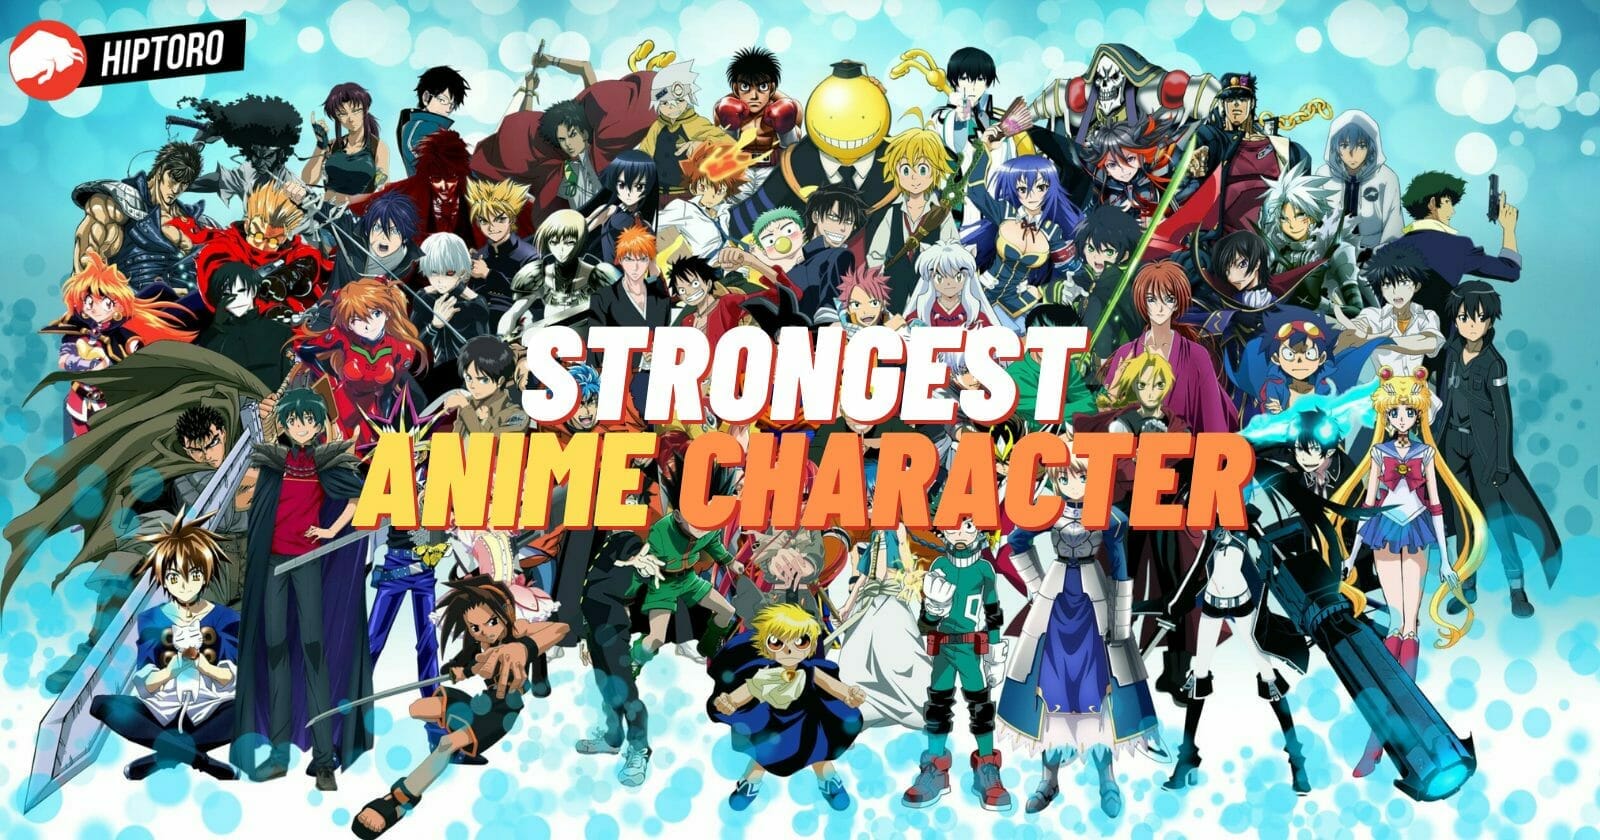 Who Is The Strongest Anime Character?